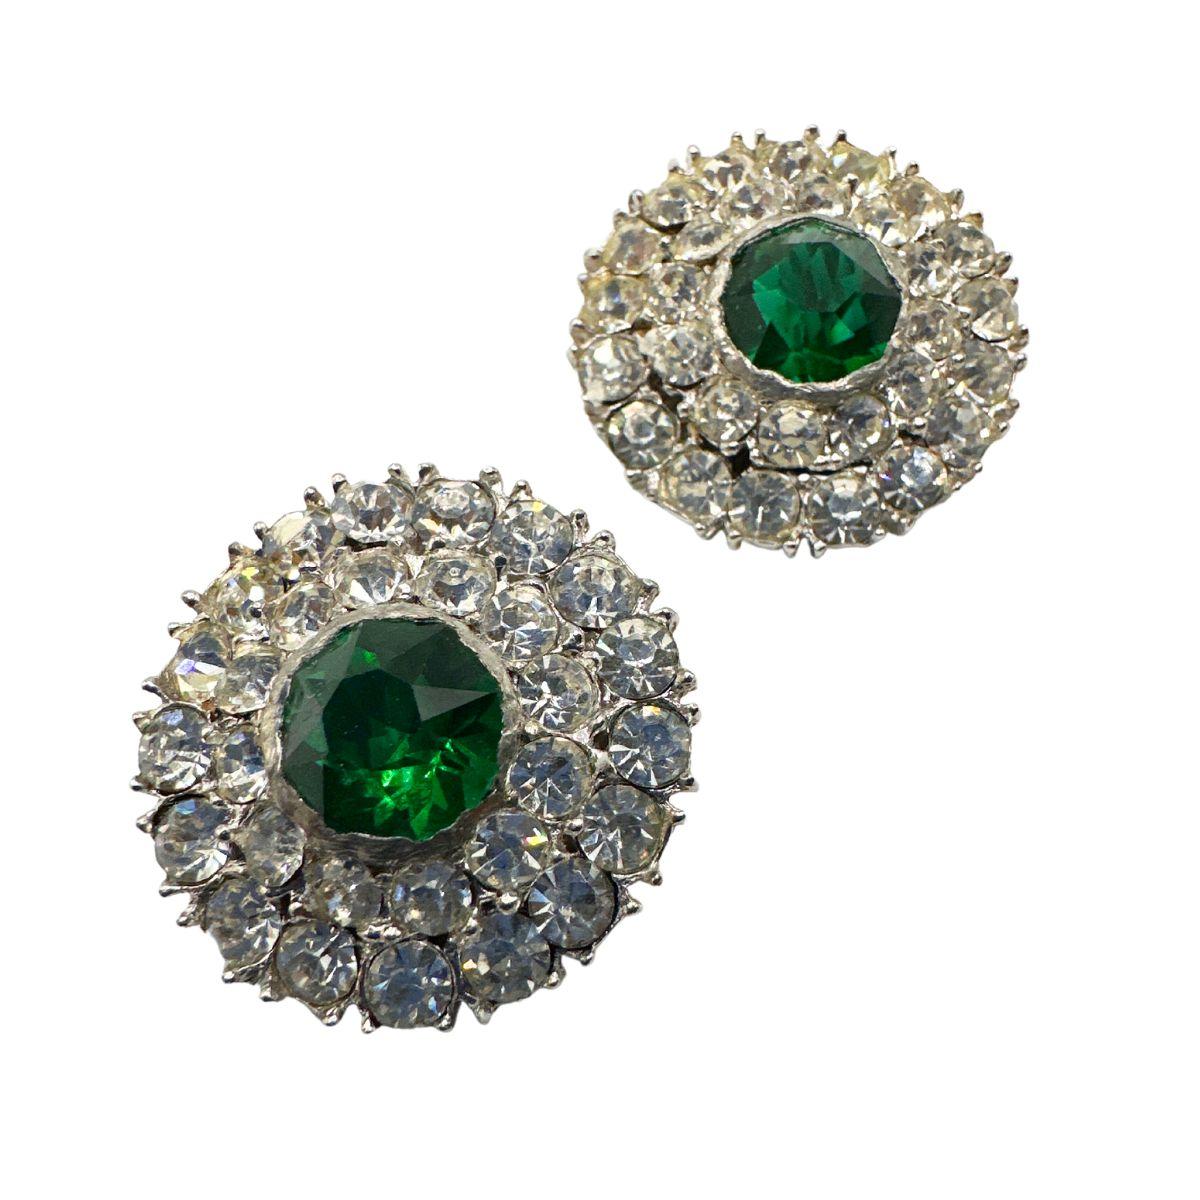 Earring Diameter: 1.16″

Bin Code: E12 / P2

Description: Elevate your style with these exquisite Vintage Diamond Cut Green Glass and Rhinestone Earrings. Crafted with meticulous attention to detail, these earrings exude vintage charm and capture